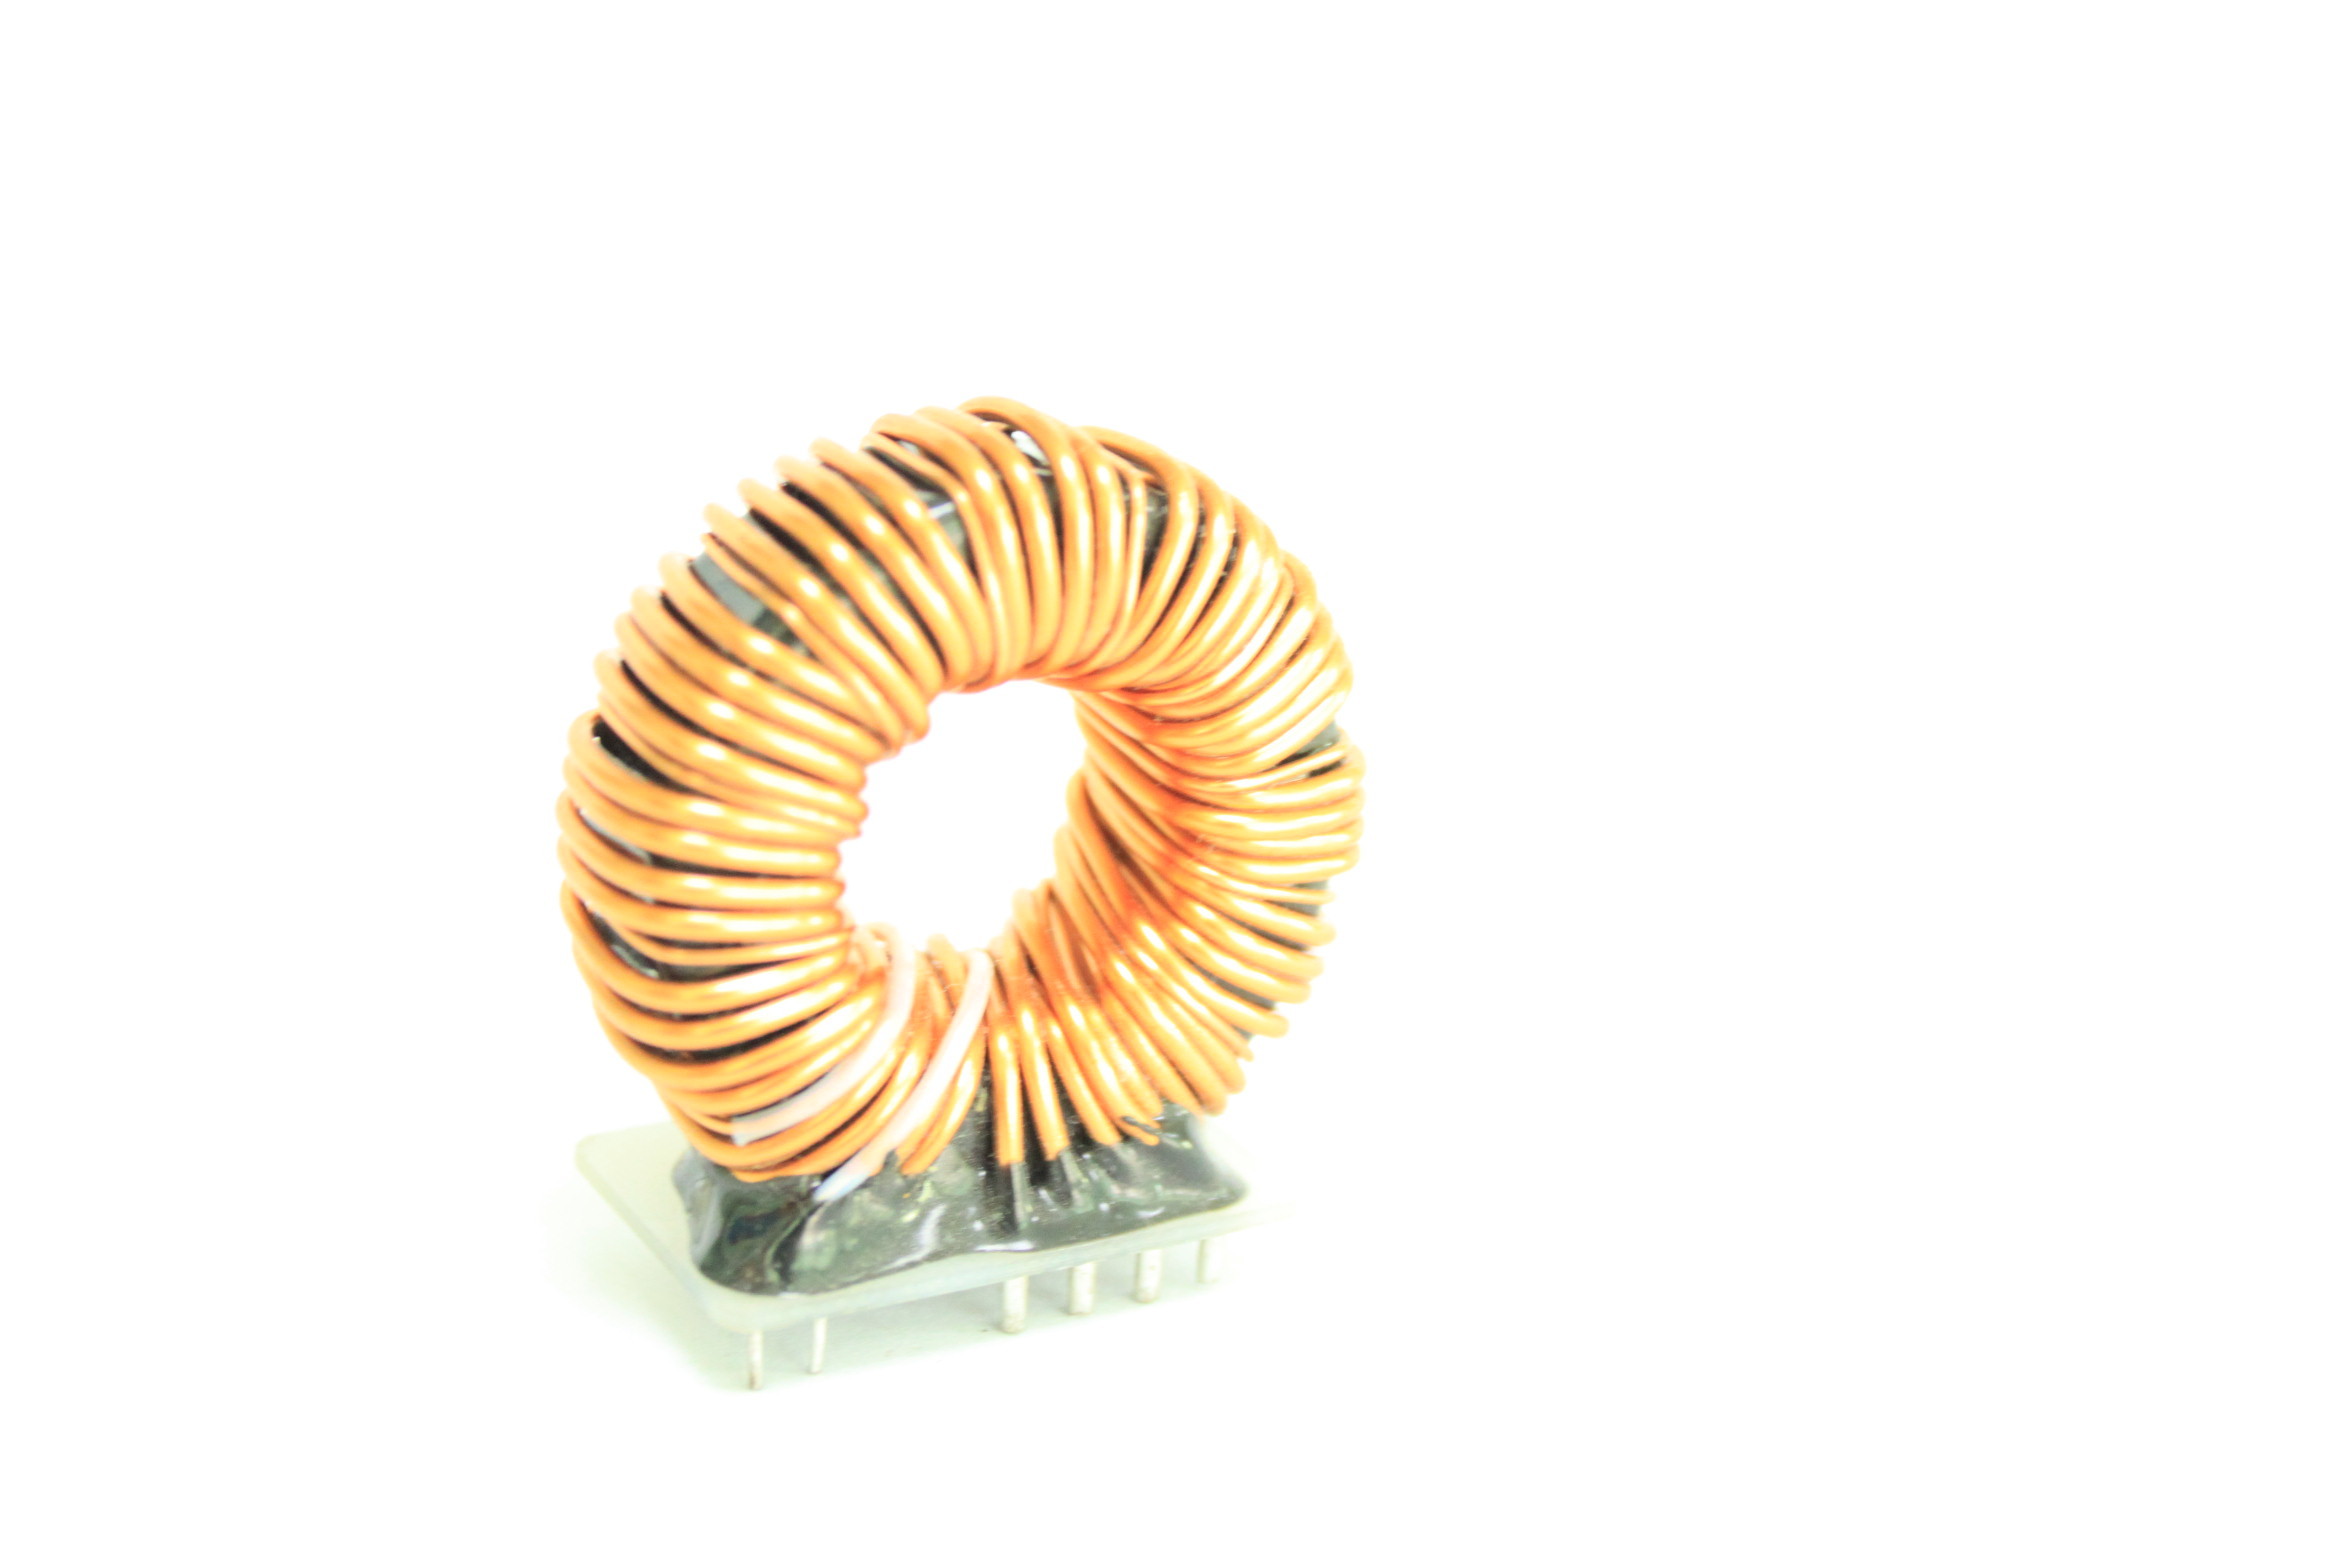 CS330125 DIP Power Inductor 40*19.5*43mm Choke Coil Inductor